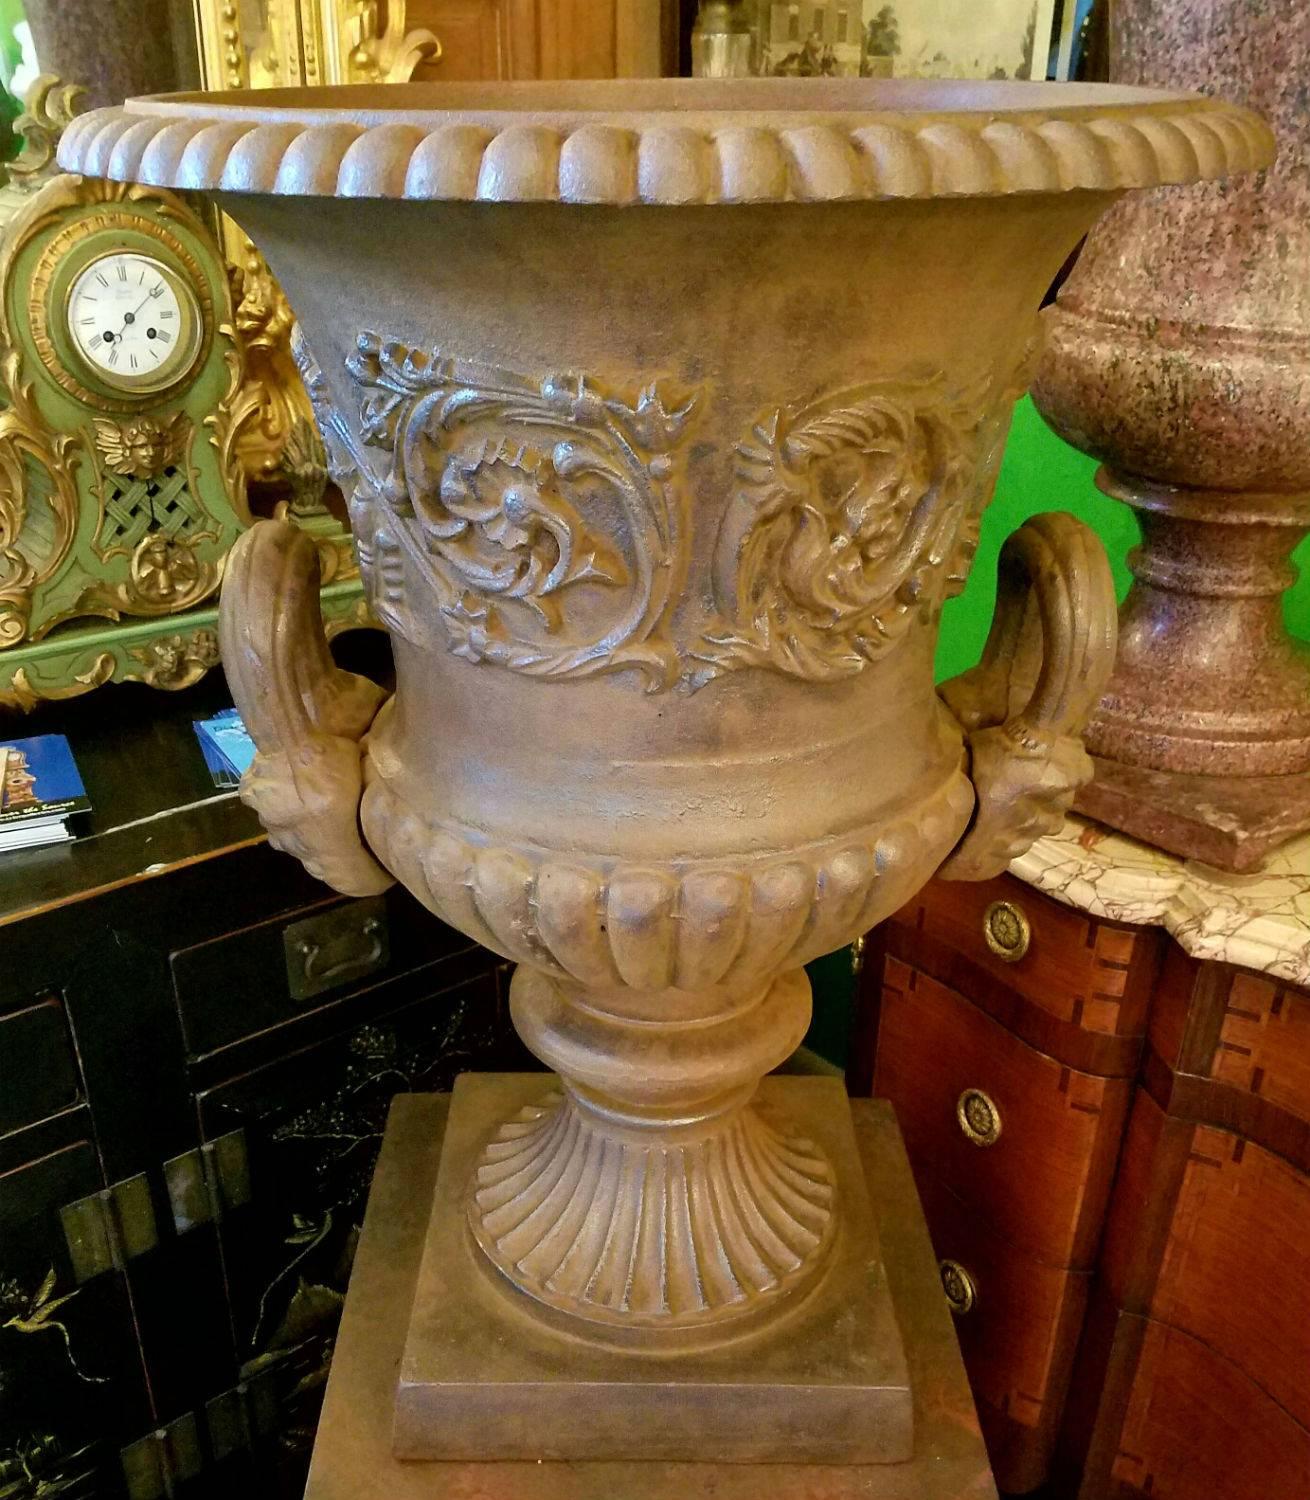 Antique cast iron garden urn and pedestal.

Measures: Overall height 54.75